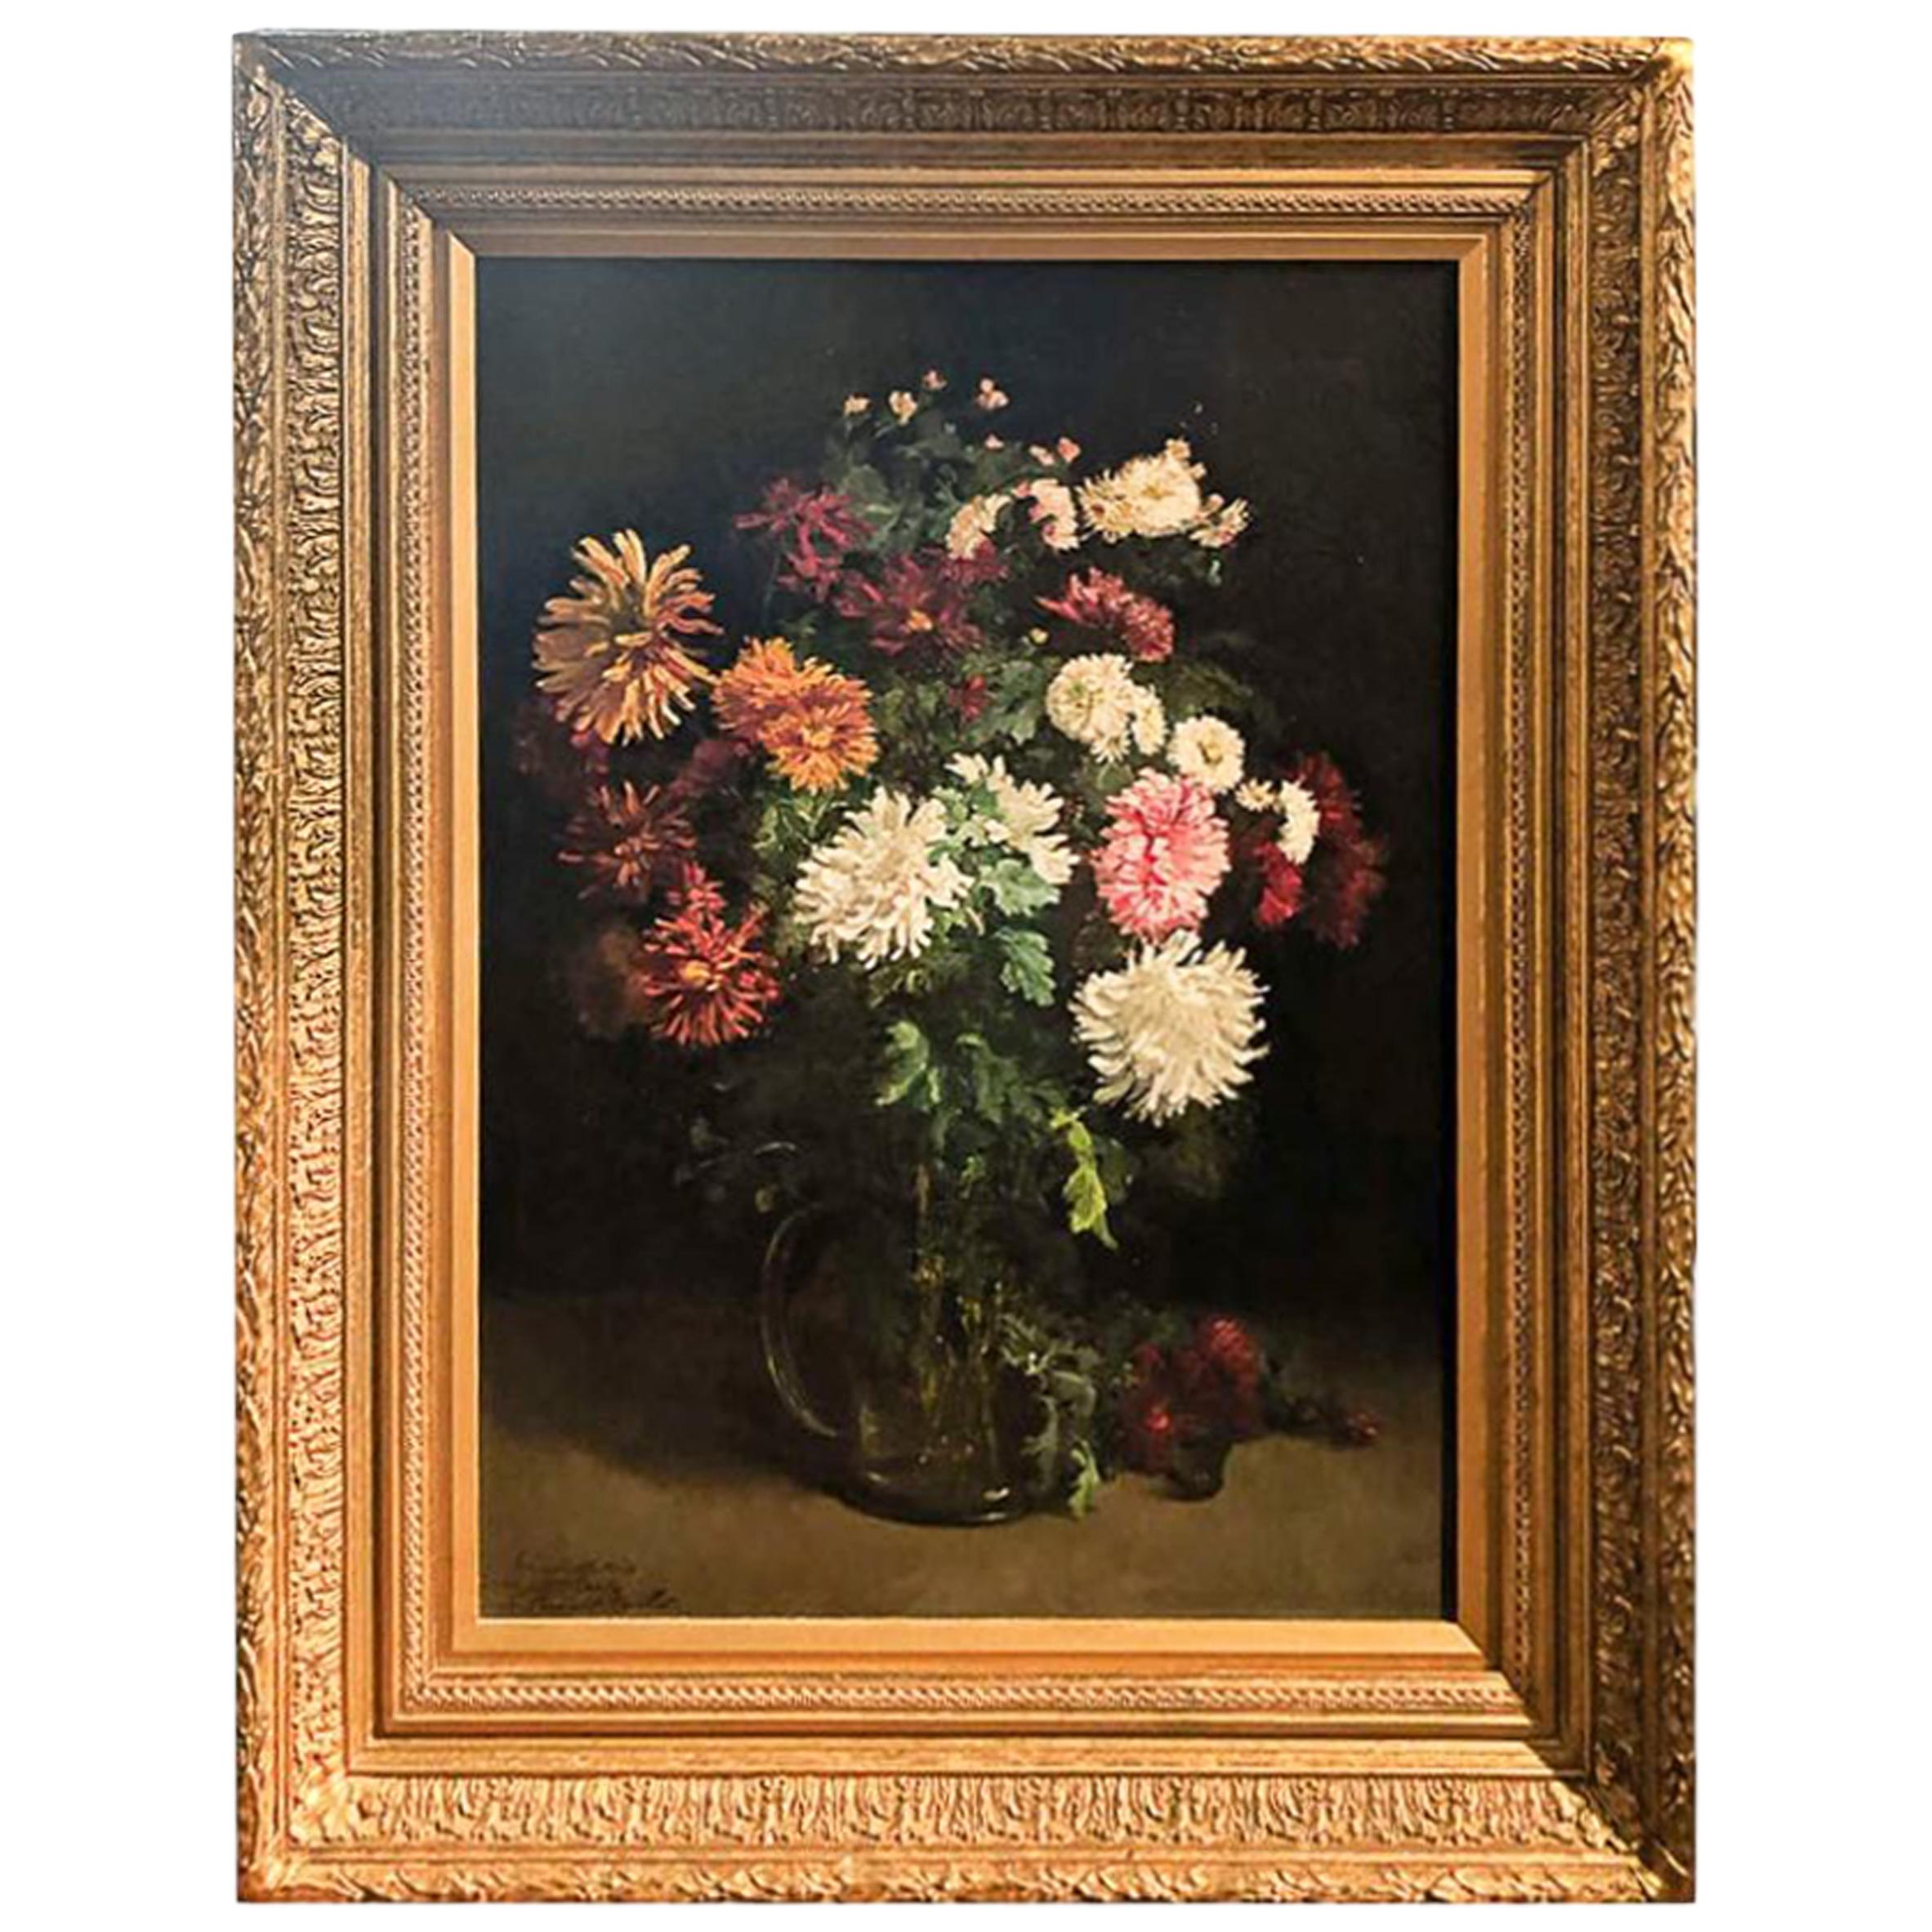 19th Century Oil on Canvas "Still life with Flowers" Signed L. Bonvalet-Barillot